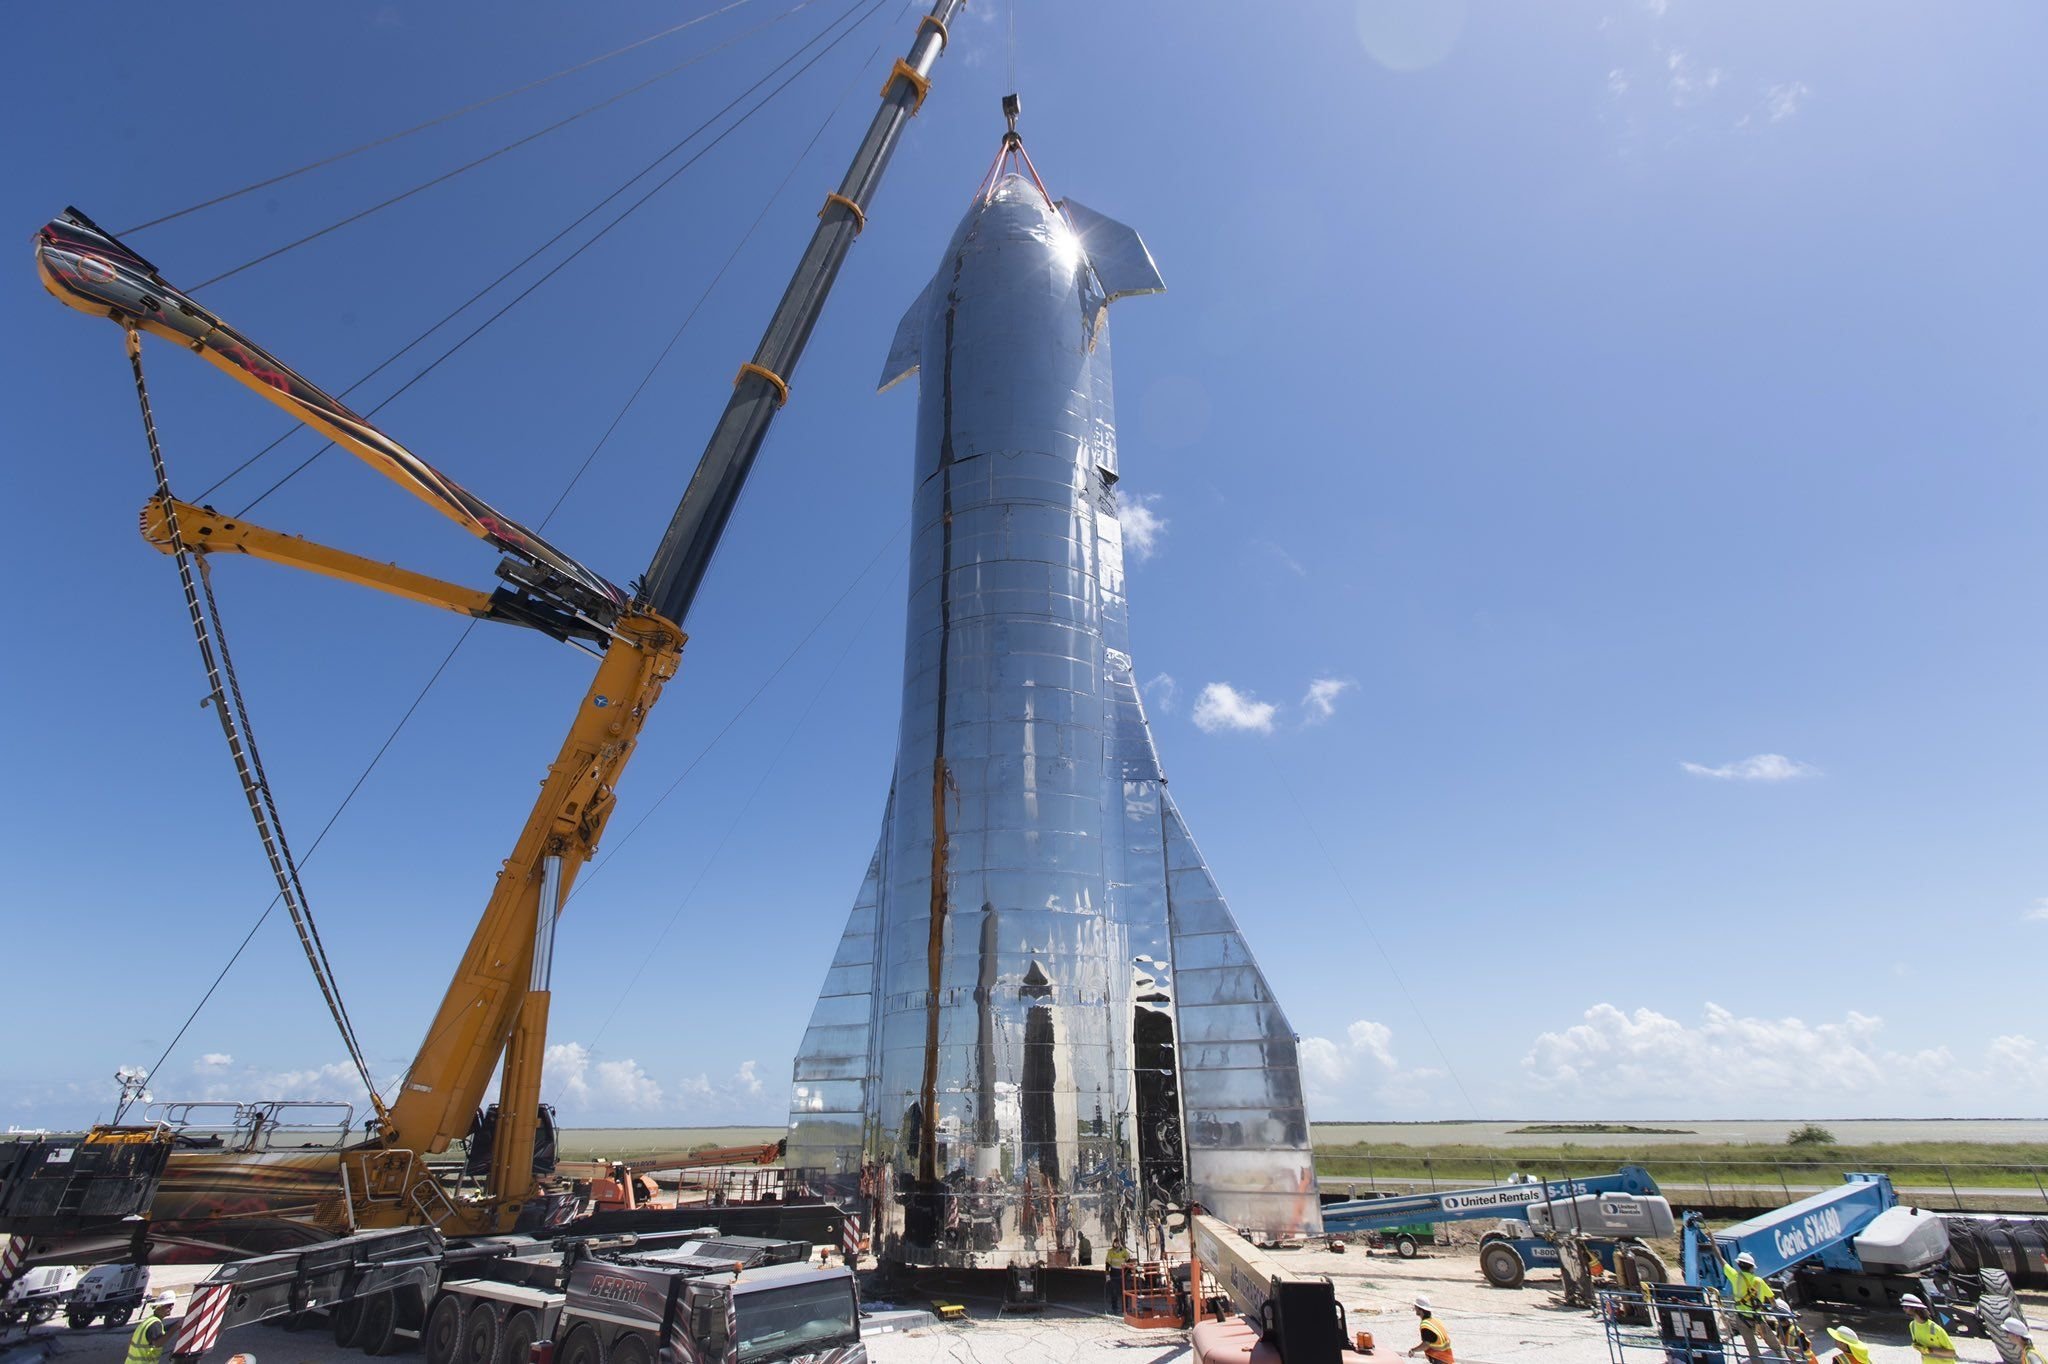 SpaceX has launched the construction of a new generation of rockets Starship